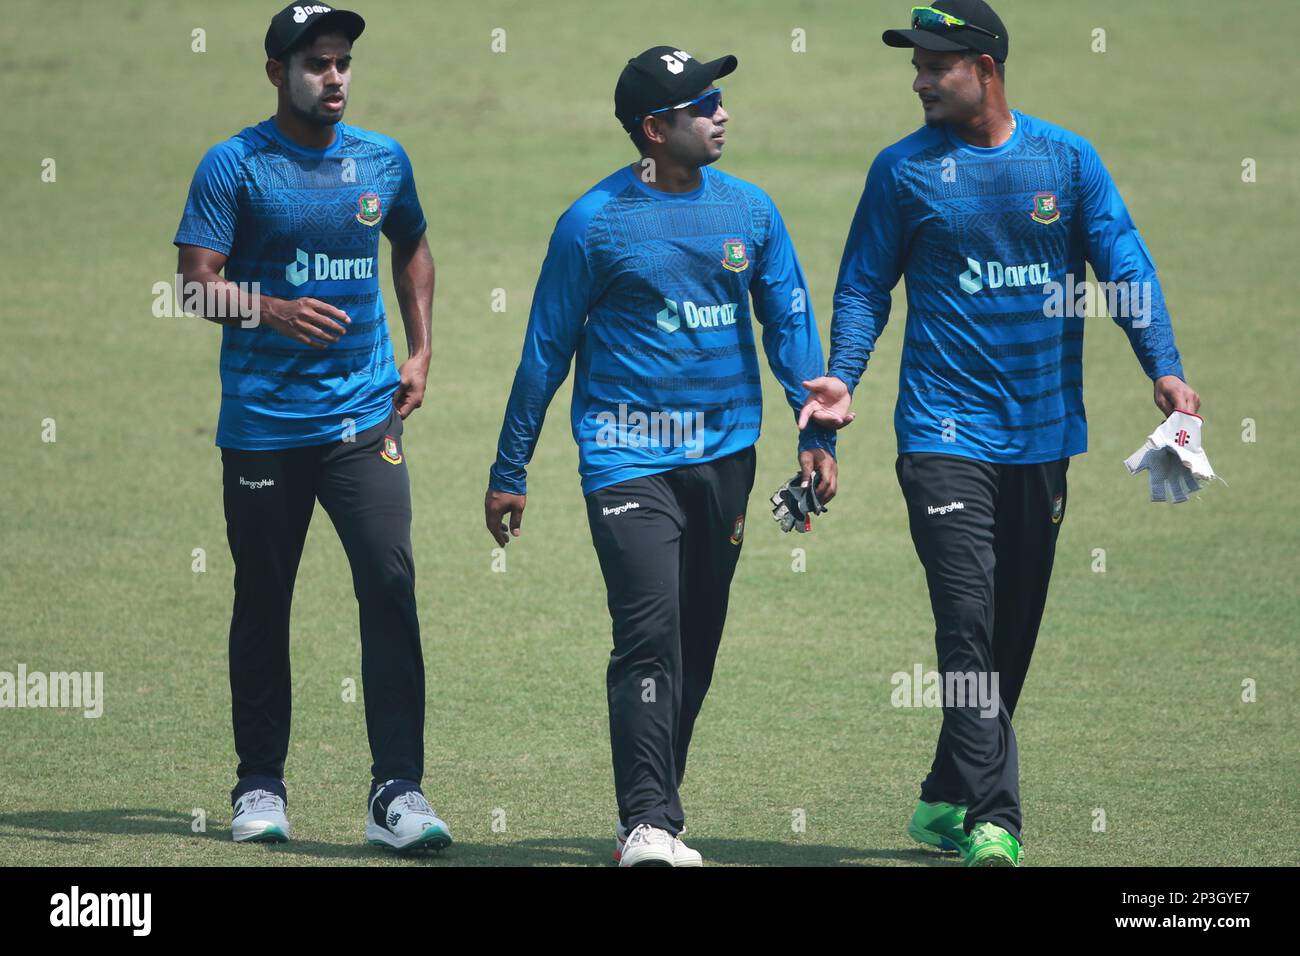 Mahmudul Hasan Raza, Rony Talukder and Nasum Ahmed during the Bangladesh One Day International Cricket Team attends practice ahead of their ODI series Stock Photo